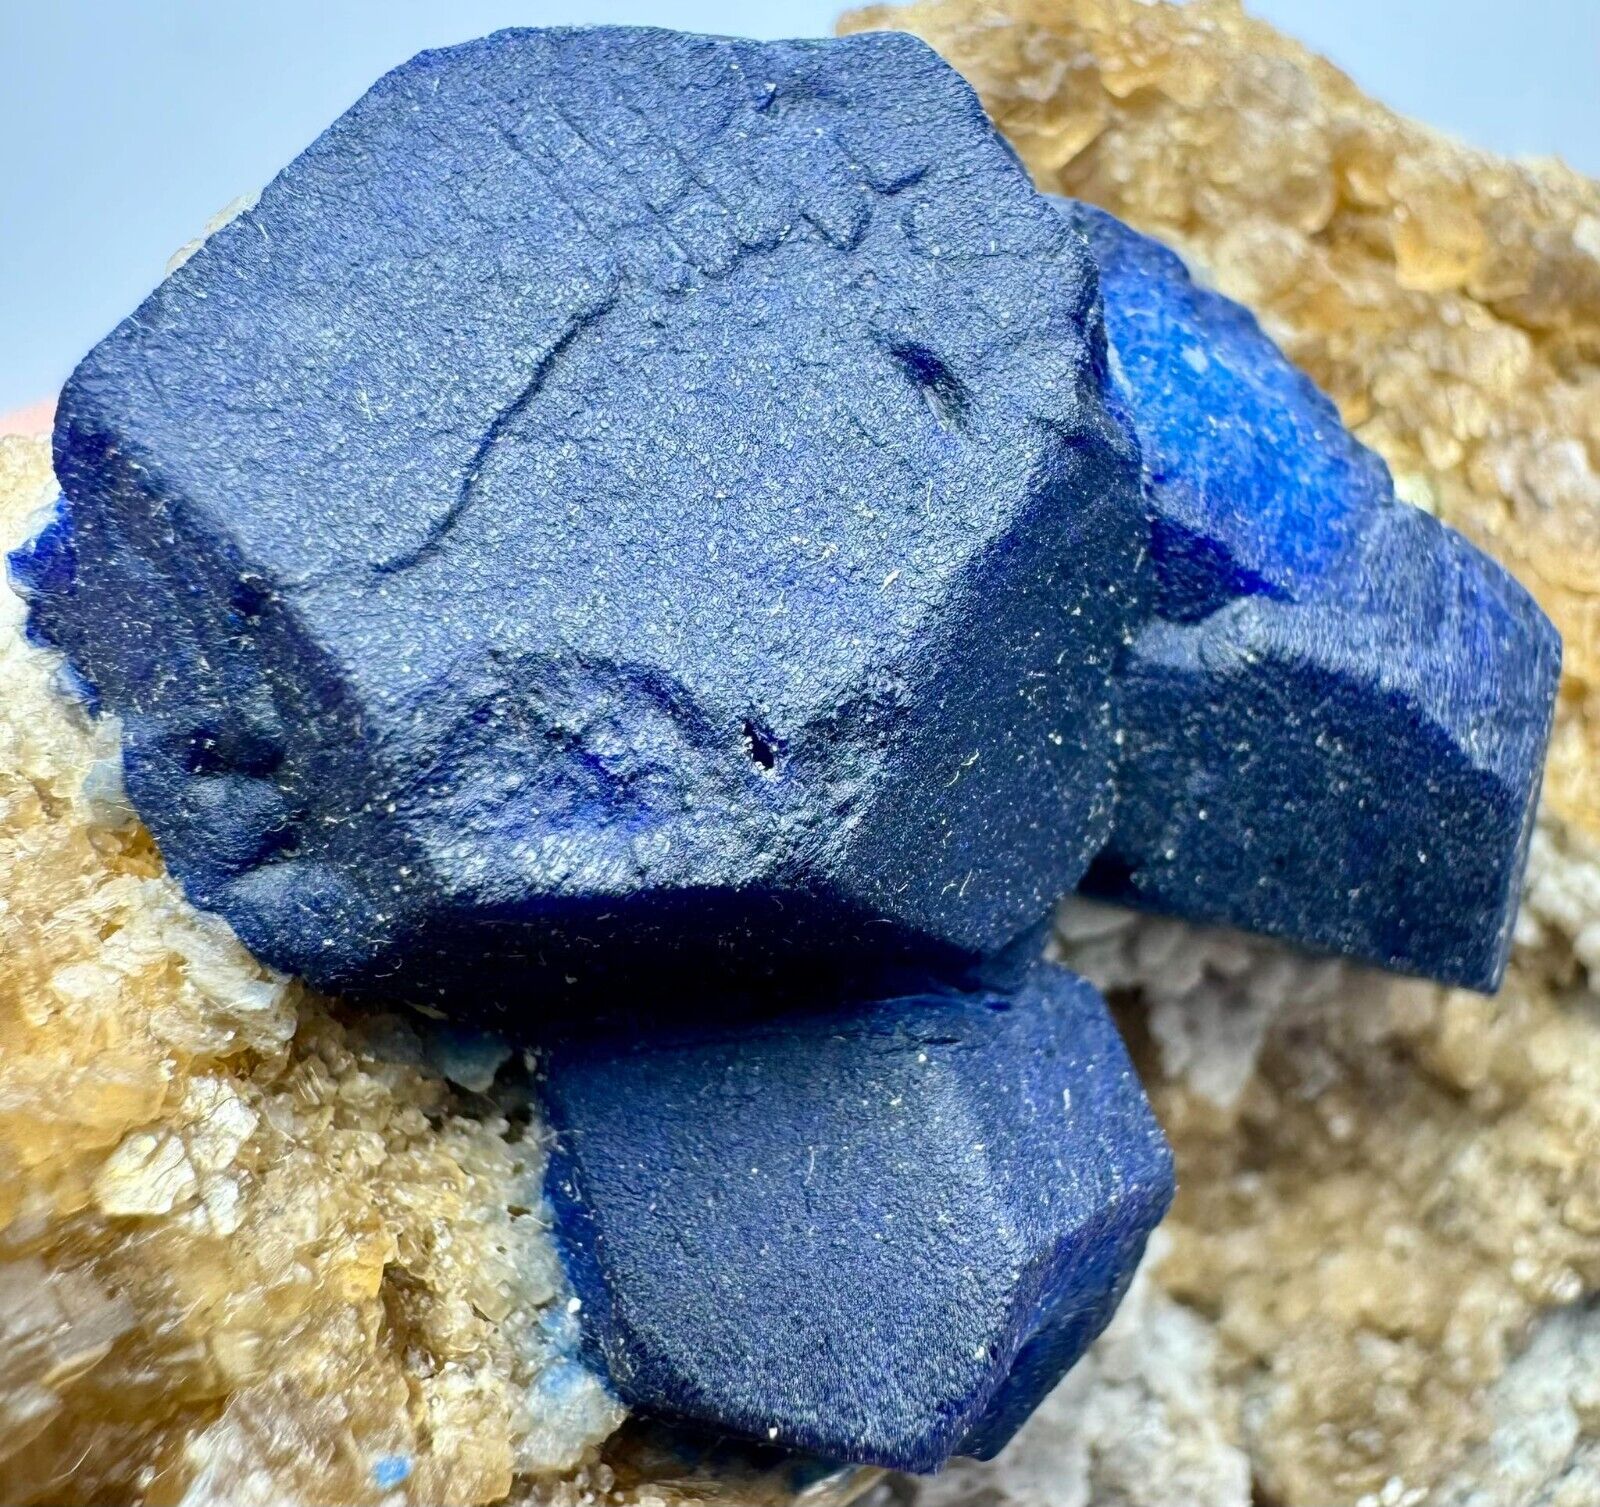 282 Gram Full Terminated Top Blue Lazurite Crystals Combined With Mica From @AFG